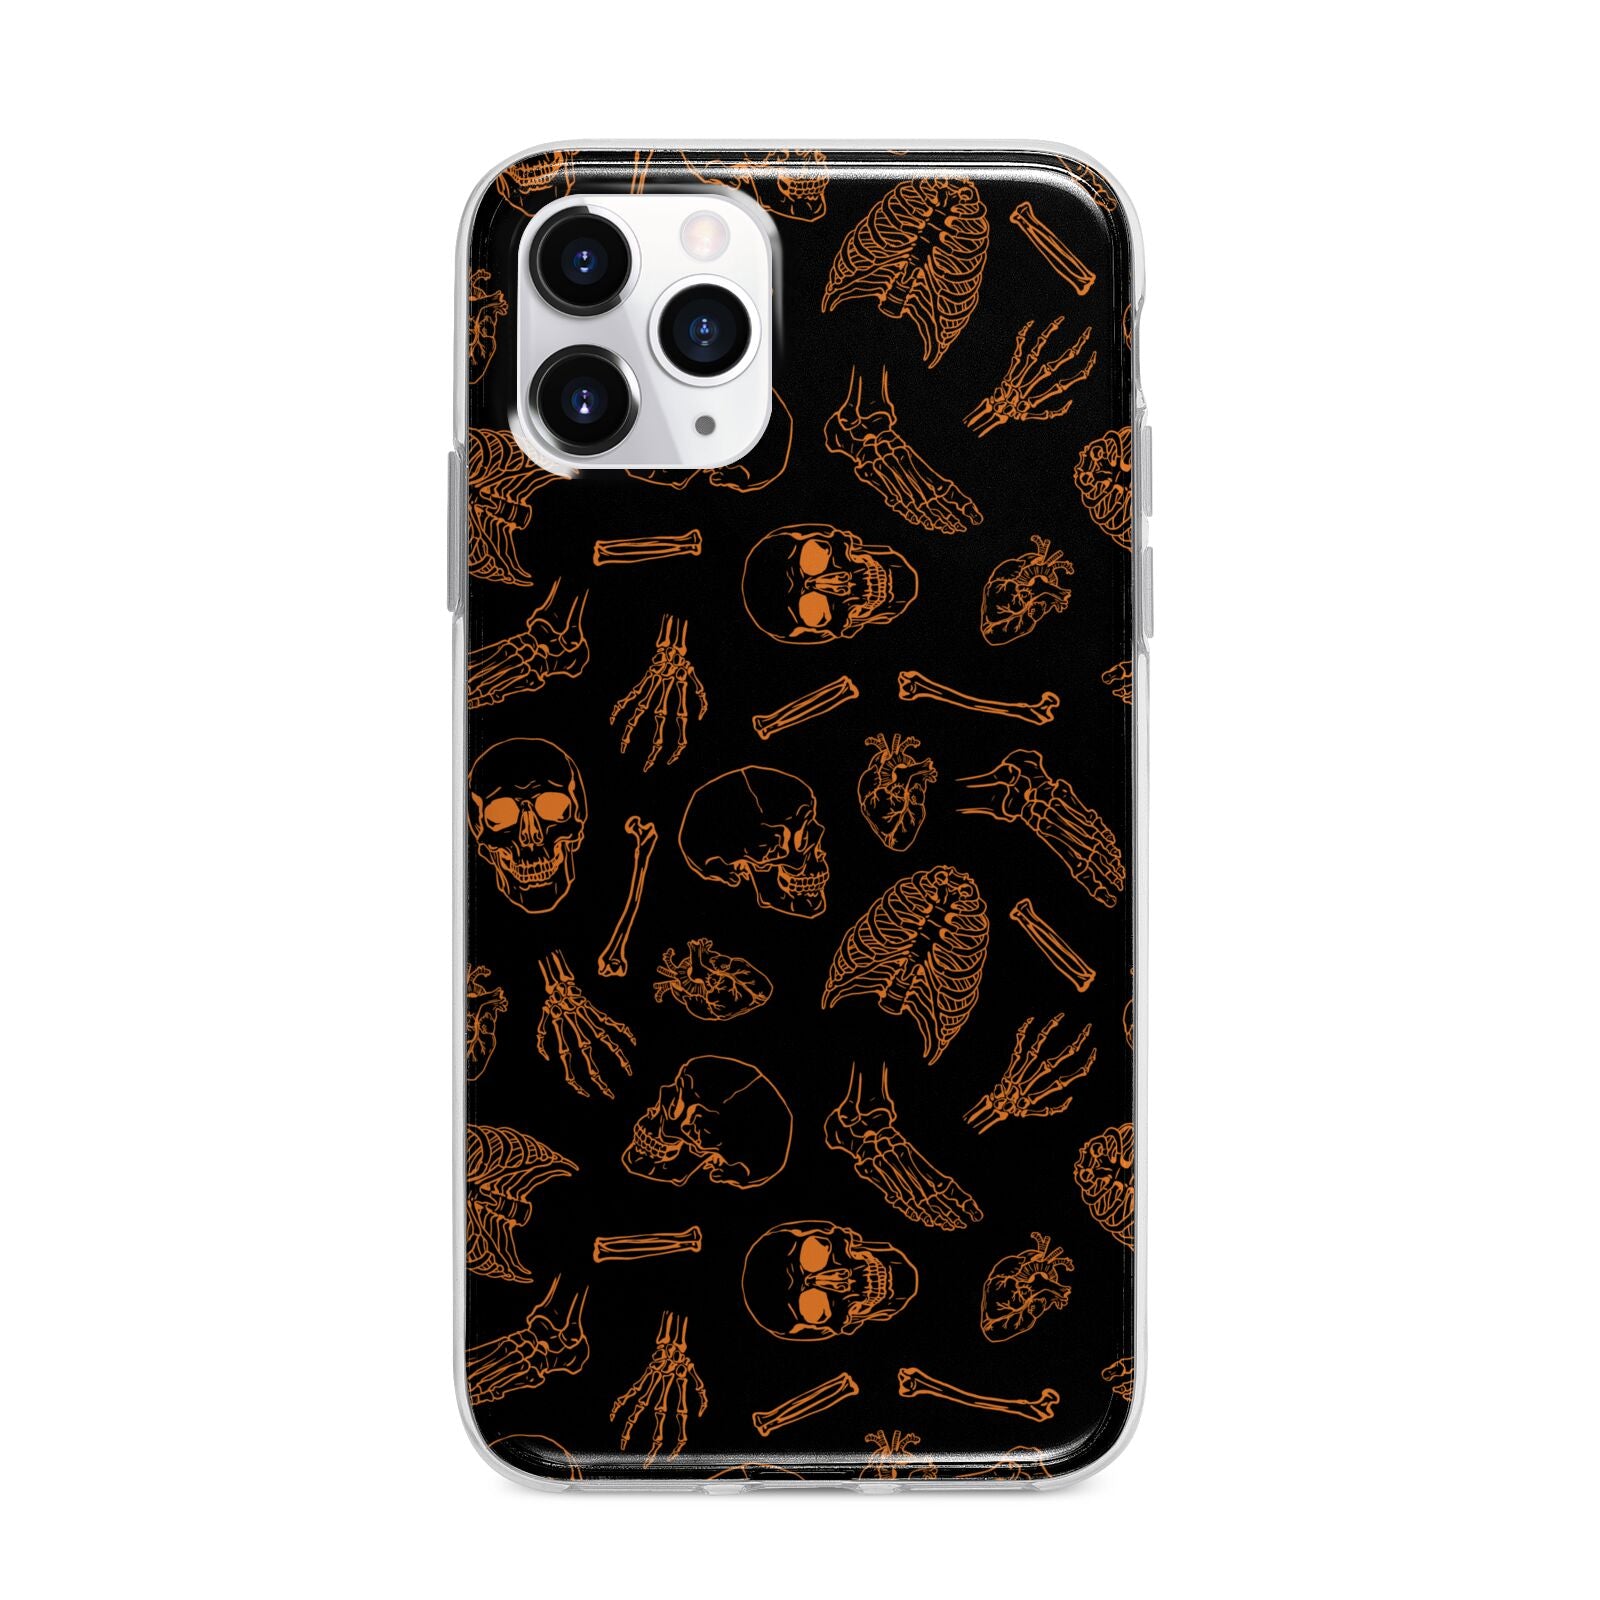 Orange Skeleton Illustrations Apple iPhone 11 Pro Max in Silver with Bumper Case